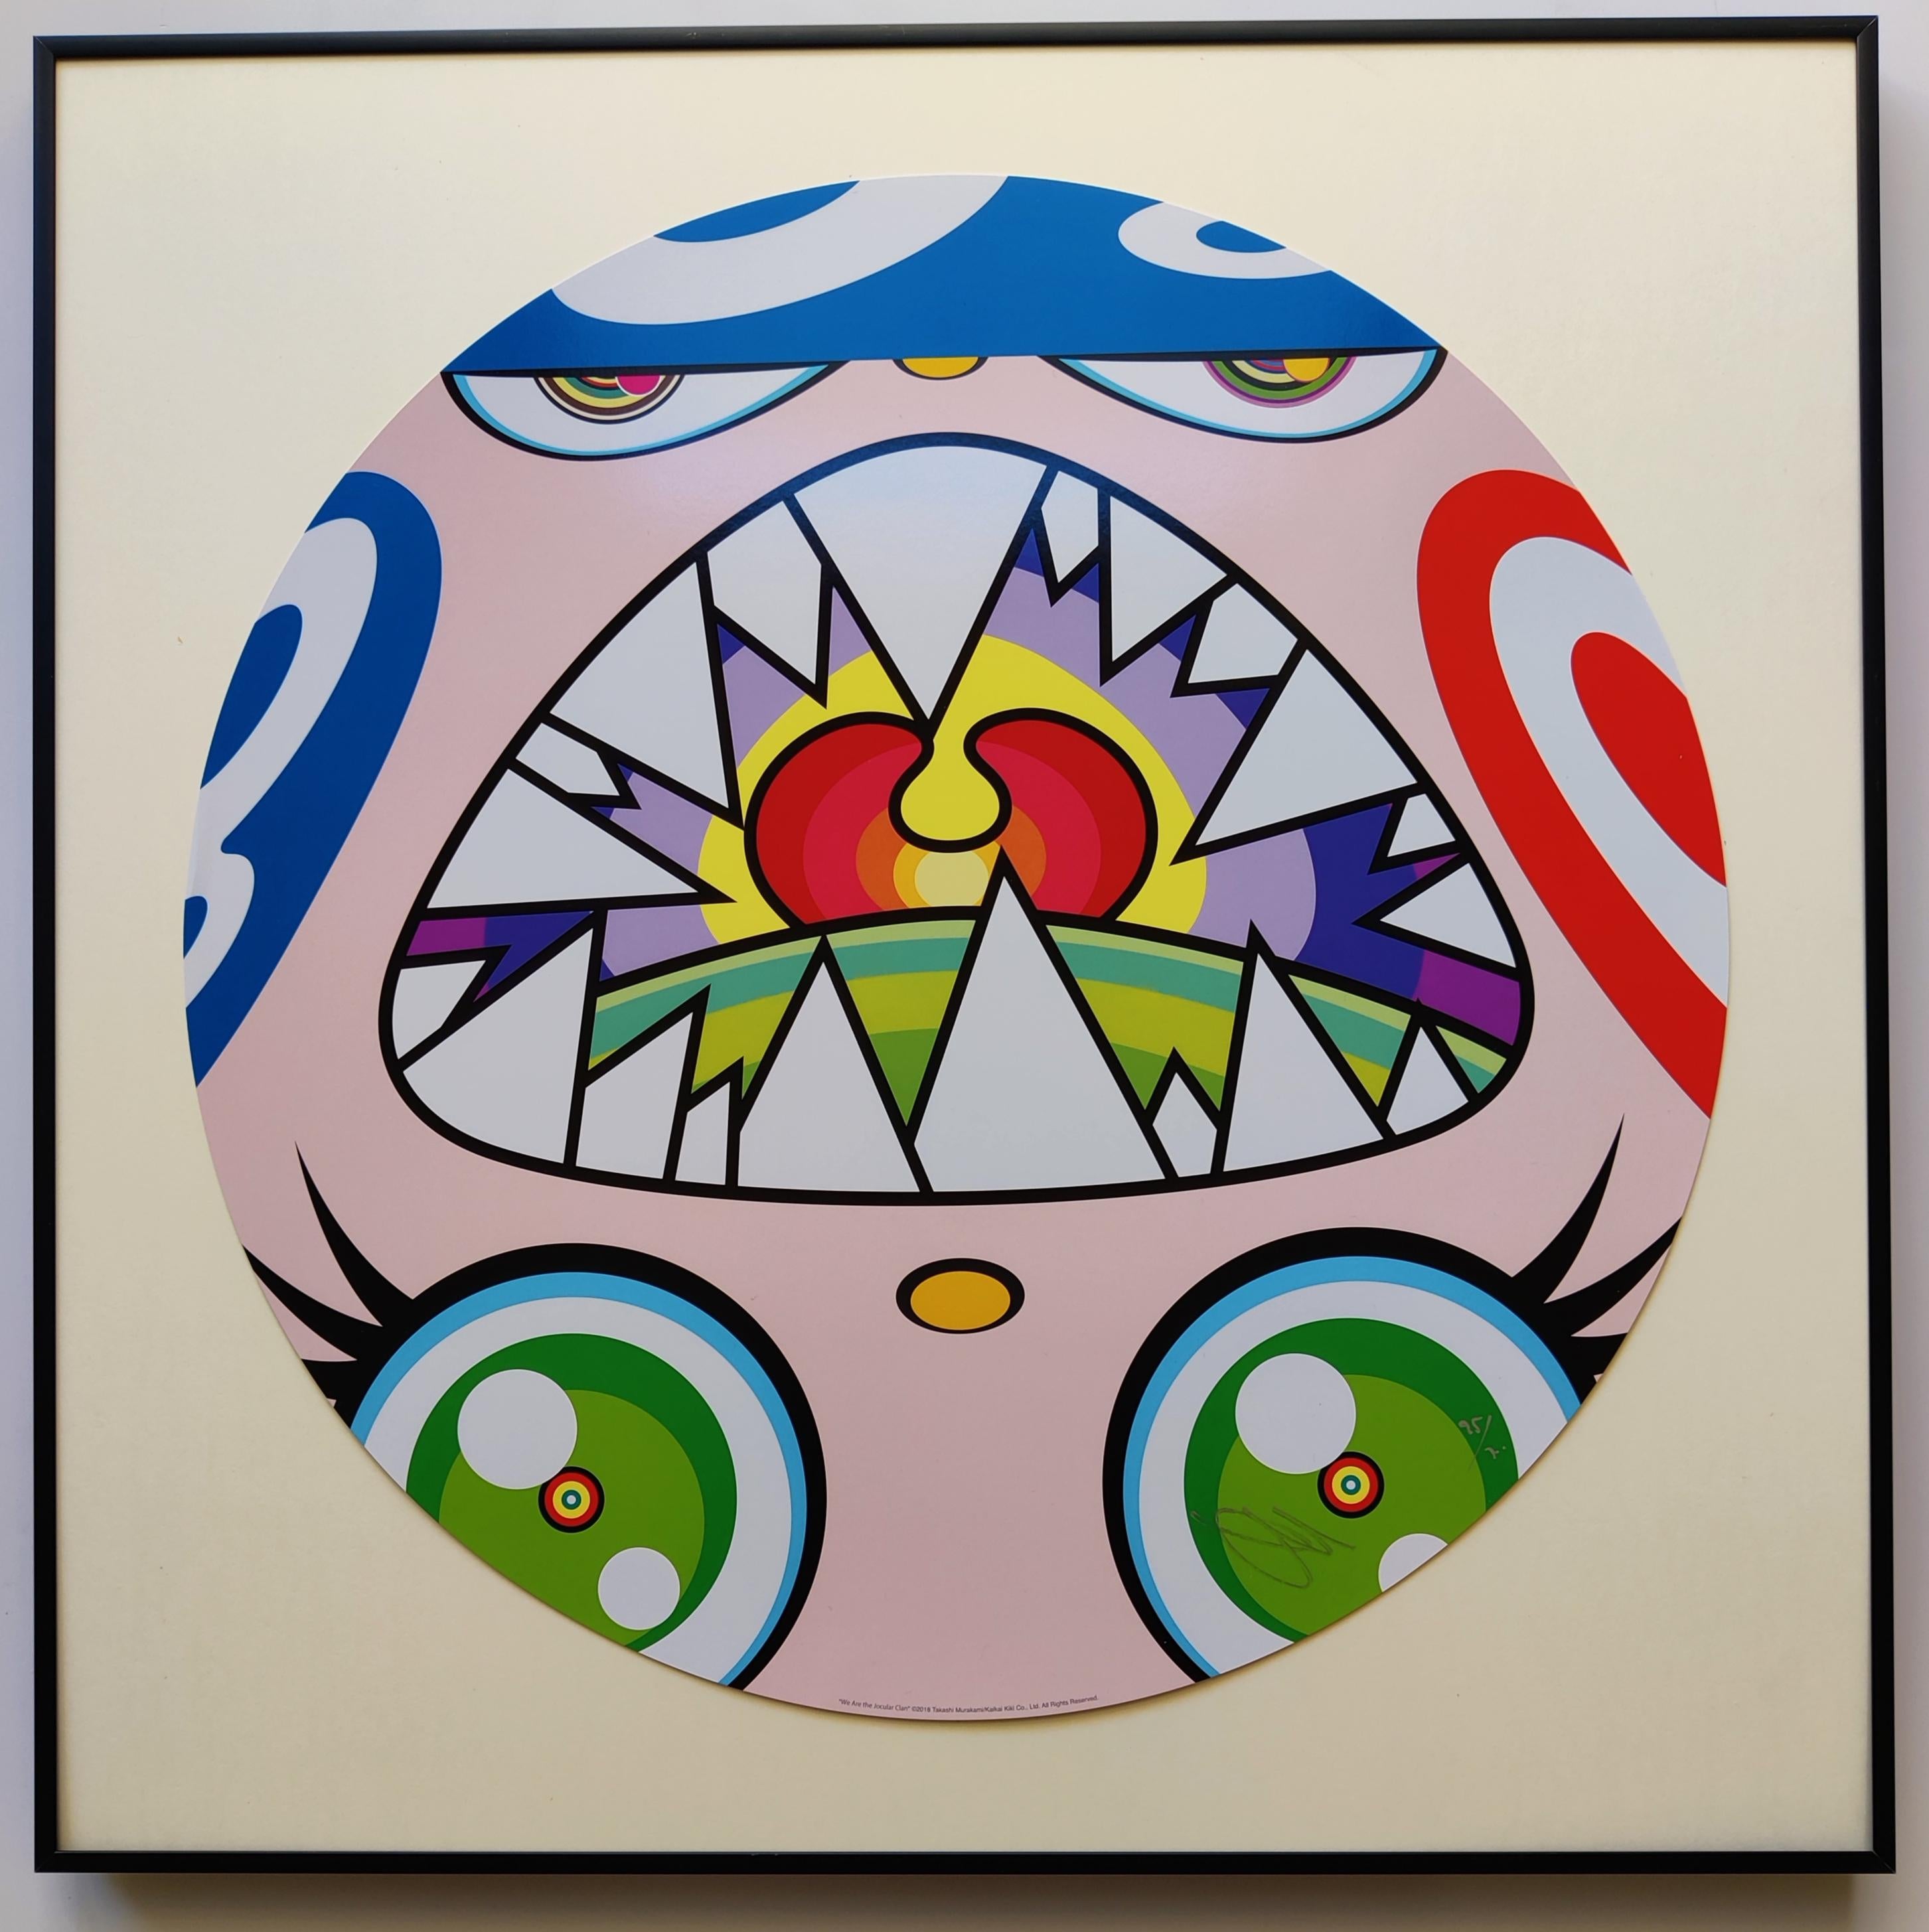 Takashi Murakami
We are the Square Jocular Clan (10), 2018
Offset lithograph
Edition: 95/300
Diameter: 50 cm
Hand Signed & Numbered by Takashi Murakami
The artwork is in excellent condition, including the original pack
Framing is an option and it